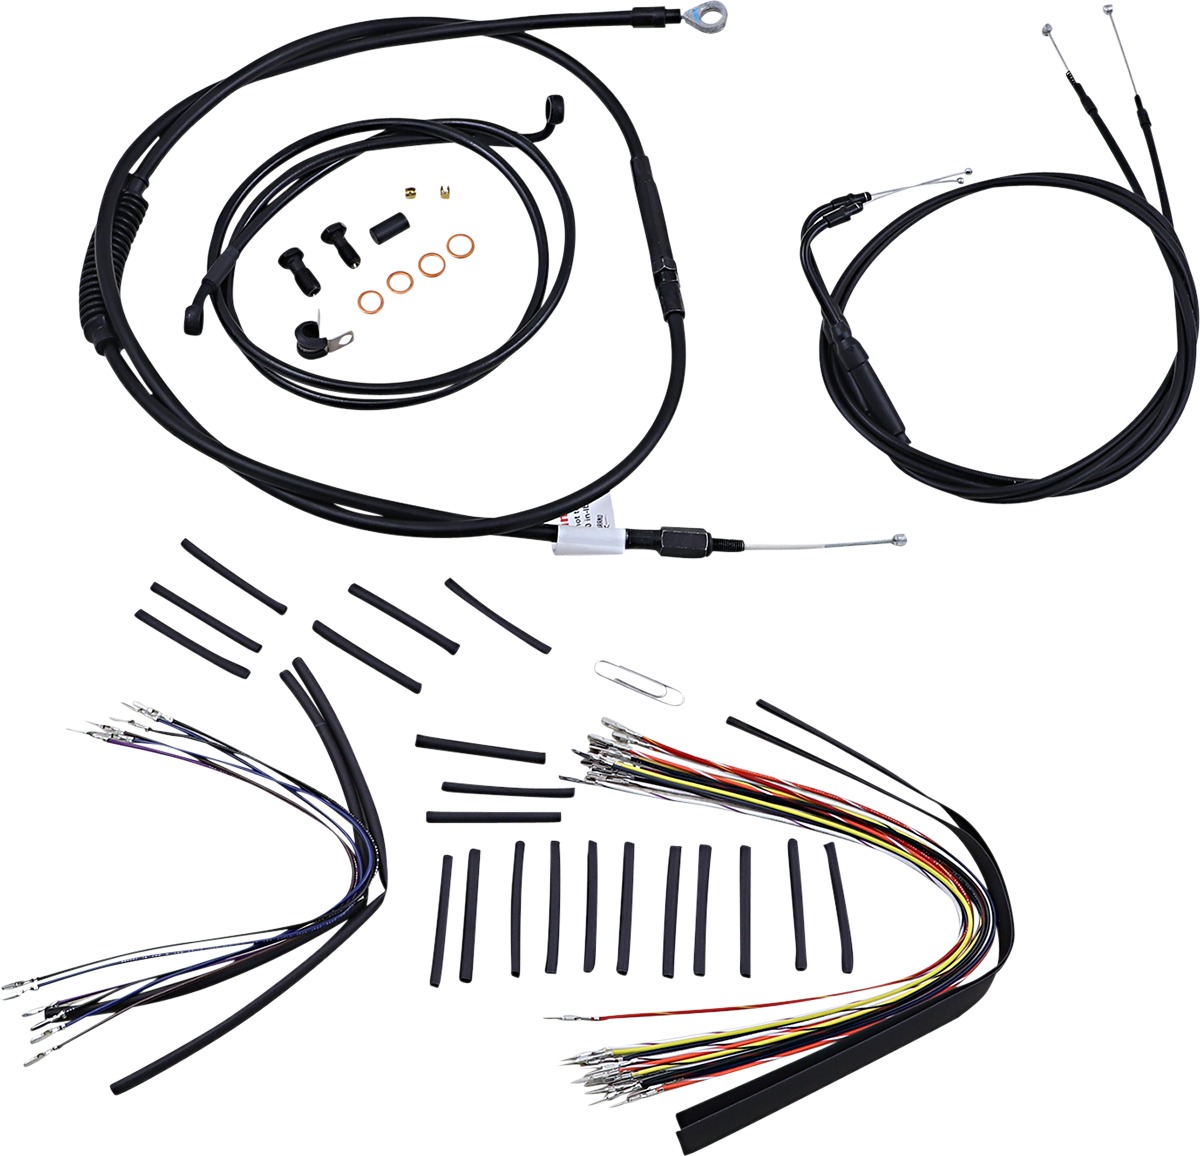 Extended Black Control Cable Kit 14" tall bars - Harley Davidson FXT - Click Image to Close